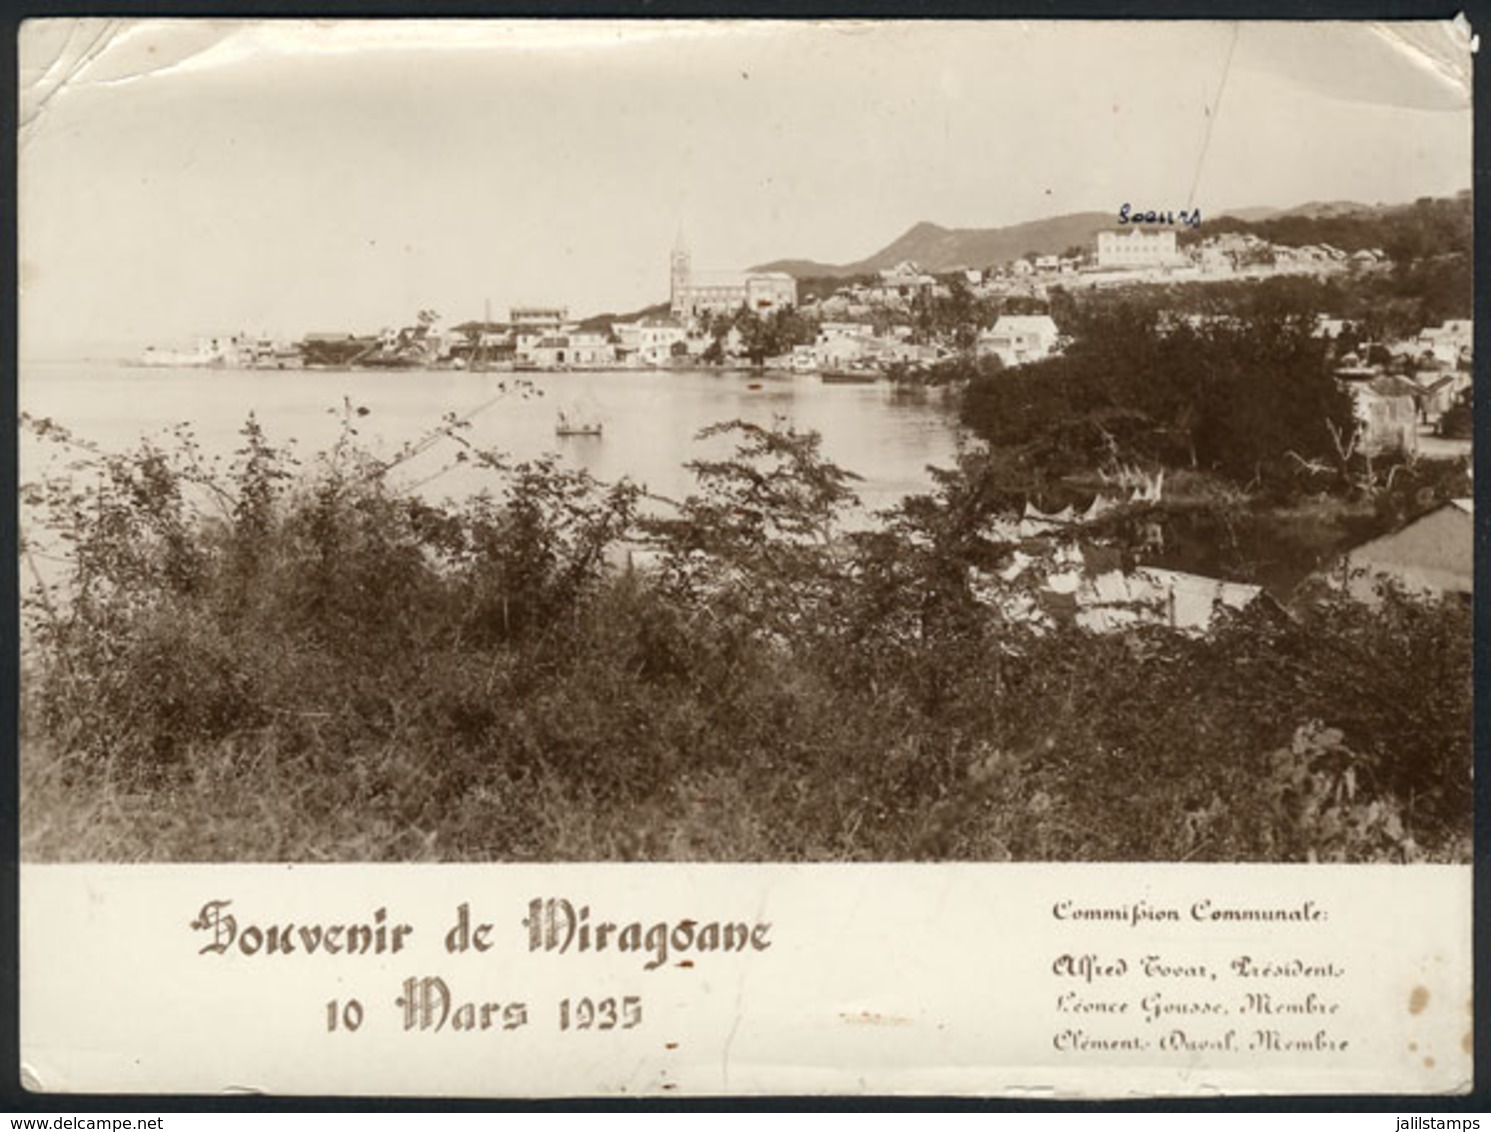 1038 HAITI: MIRAGOANE: Souvenir PC With General View Of The City, Dated 10 March 1935 And - Haiti